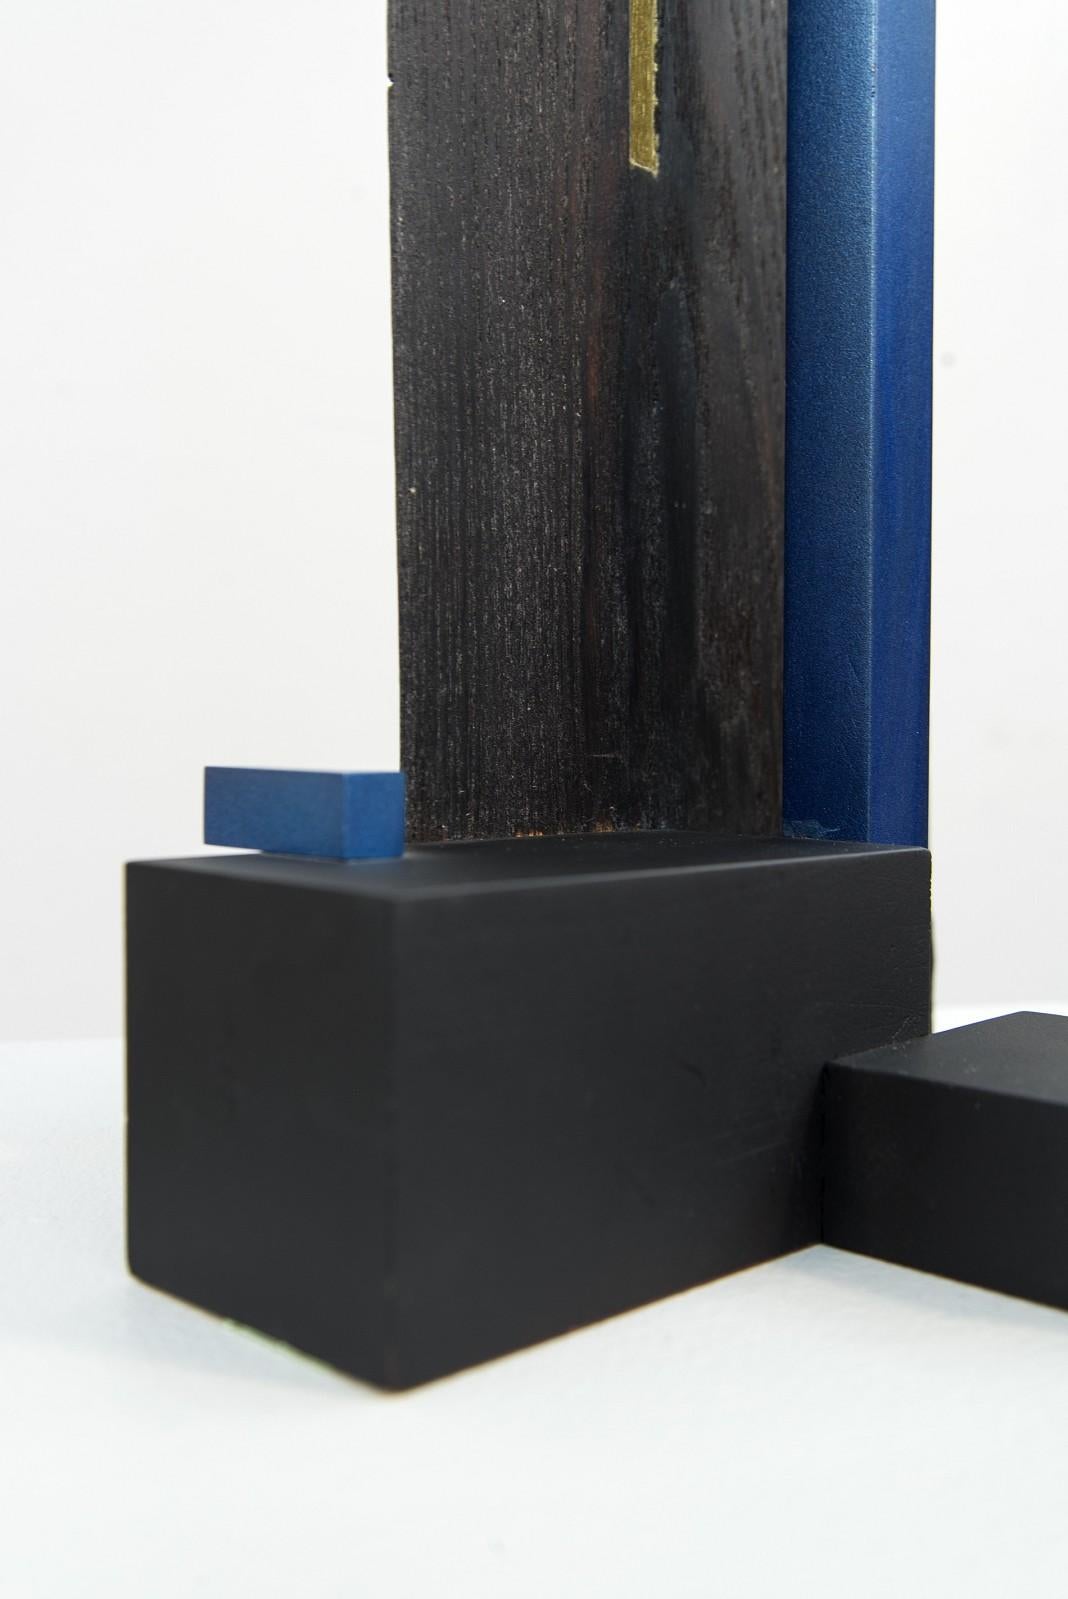 A single vertical shard of milled timber in charred black and pierced at the centre by a narrow vertical window, tapers upwards from a base constructed of painted wood orthogonals. A slender wood rectangle in sapphire blue rises parallel to the